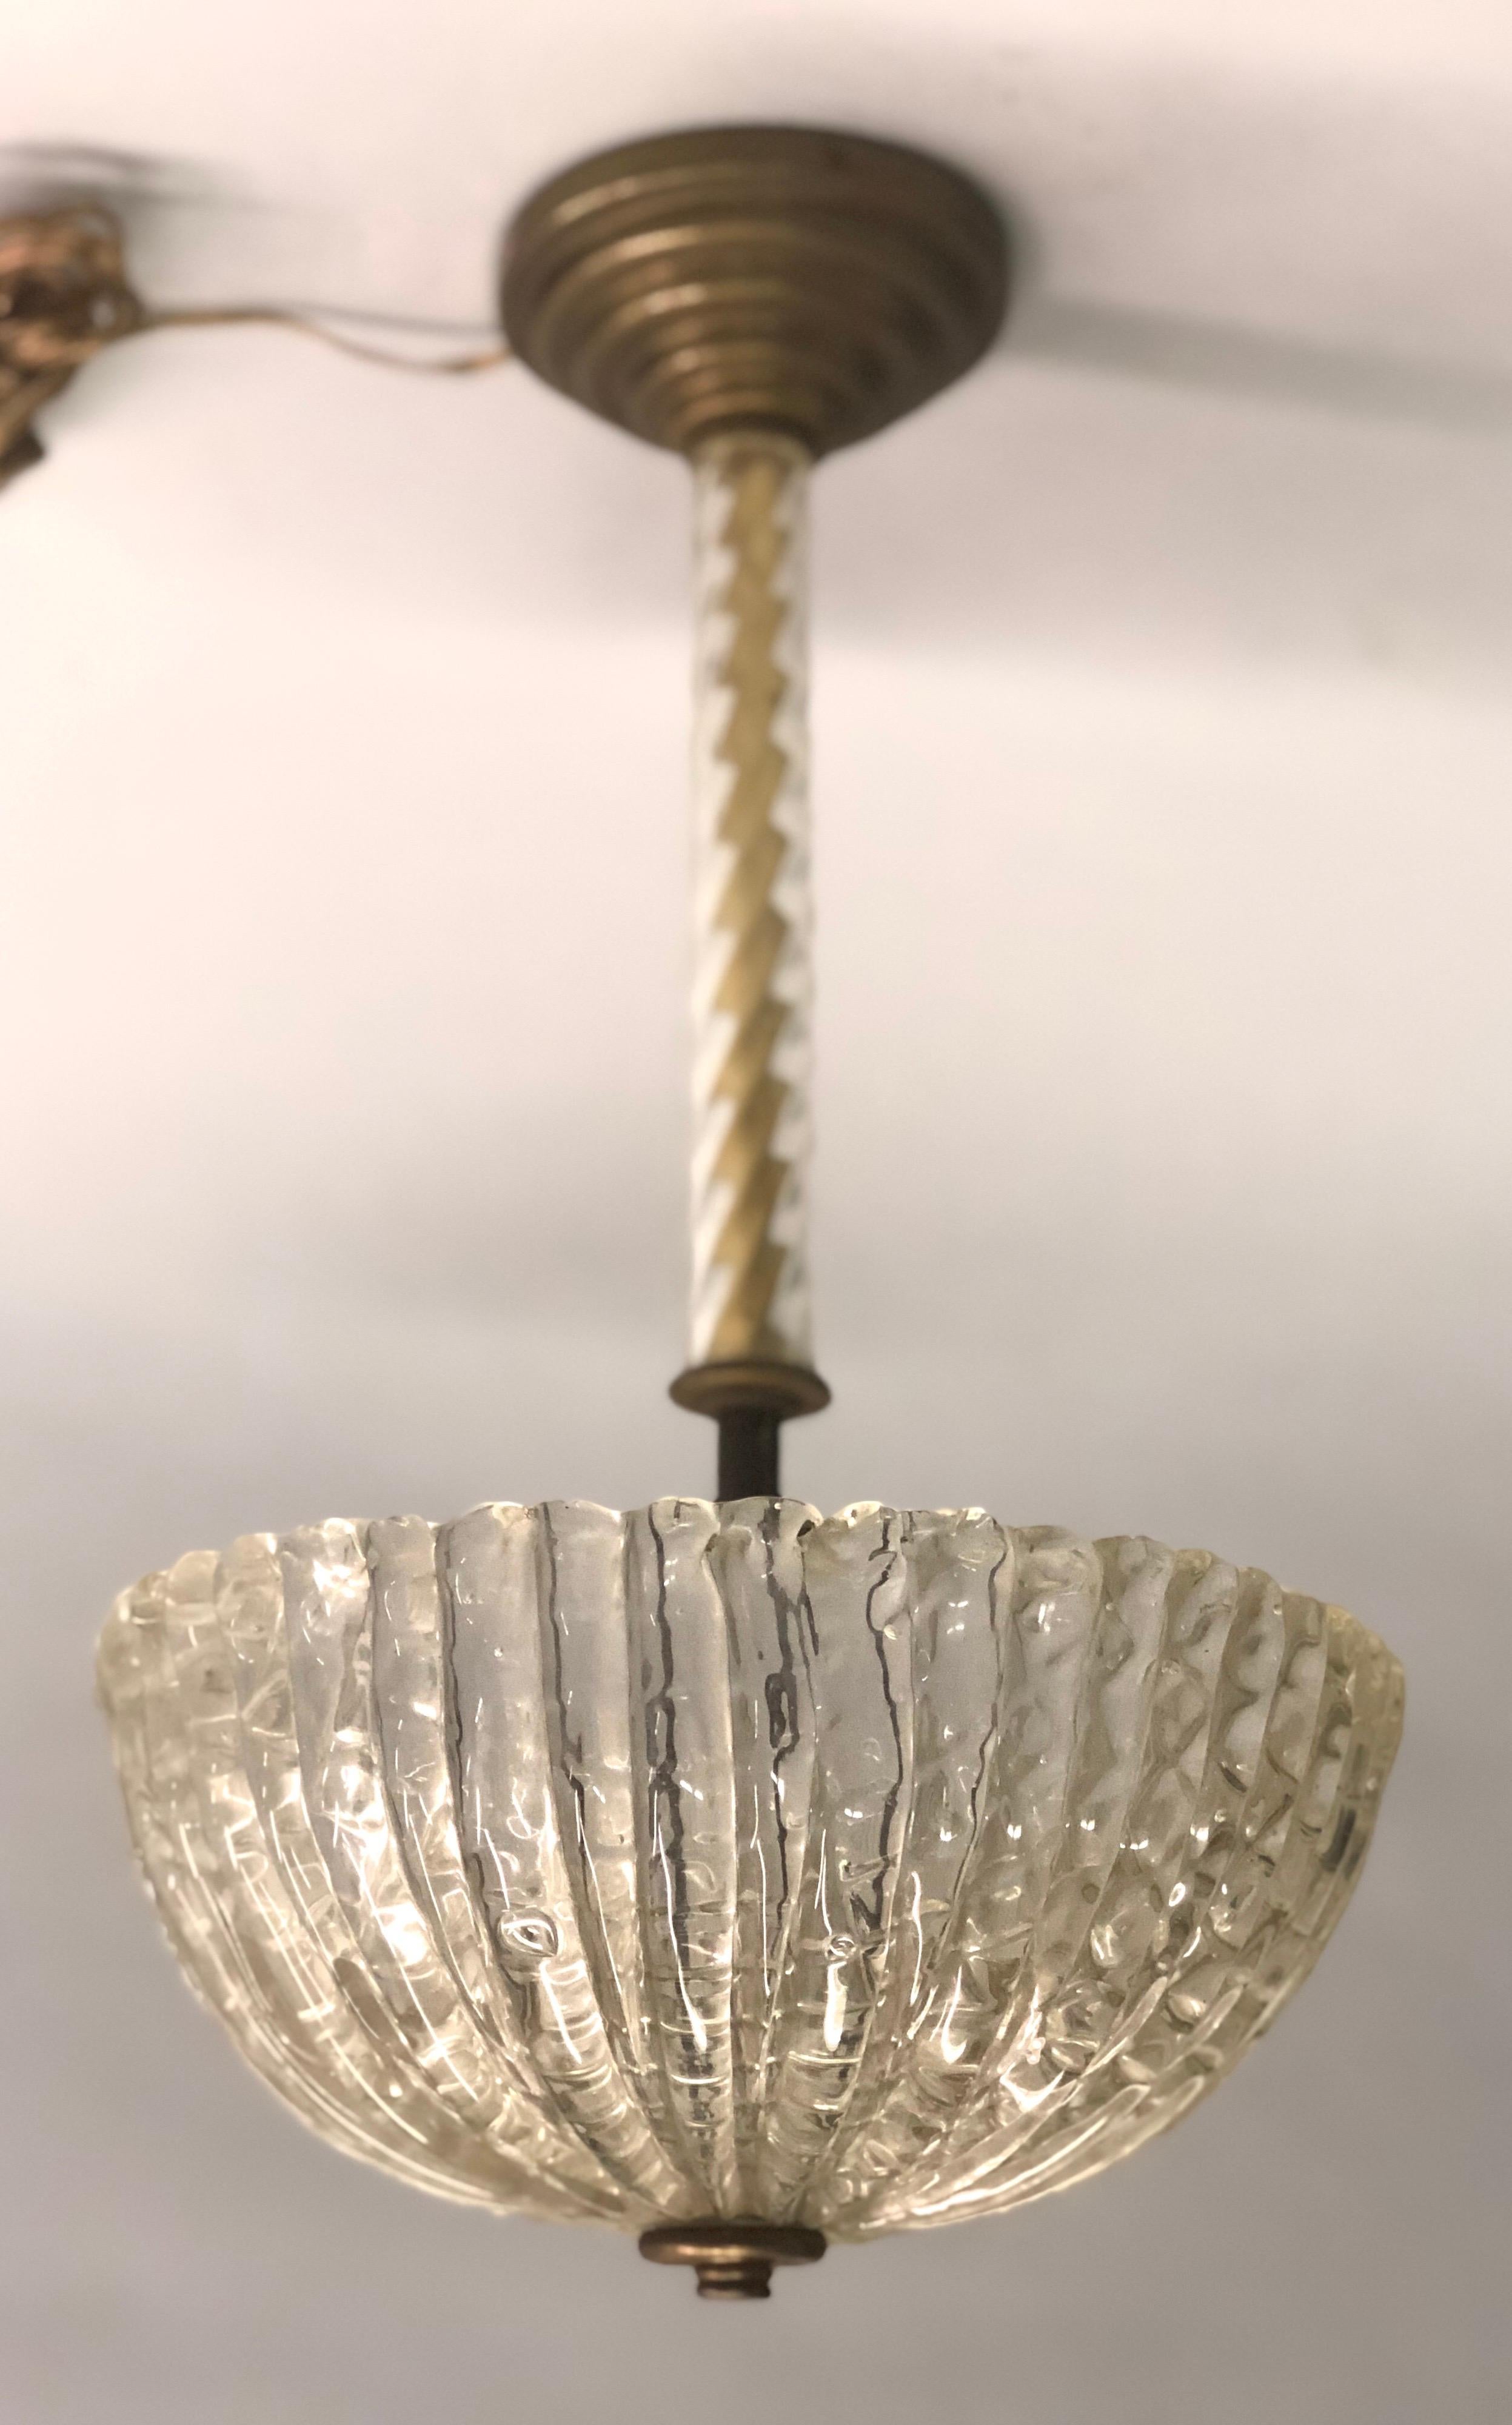 2 Italian midcentury hand blown Venetian glass chandeliers in the modern neoclassical spirit with hand blown shades by Barovier & Toso. The stems composed of clear twisted glass sitting on stepped bronze bases and with clear thick hand blown shades